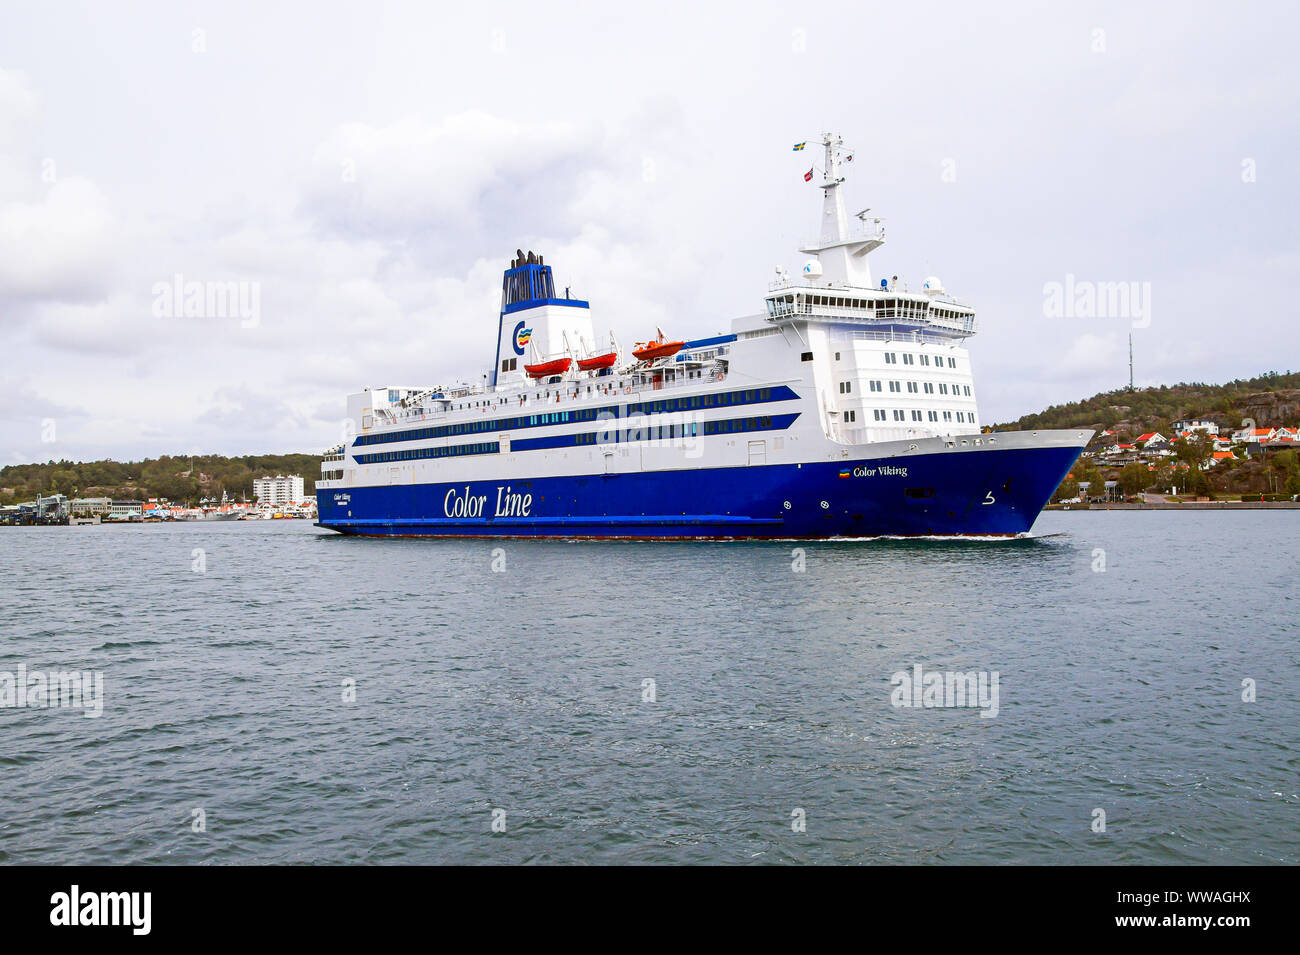 Color Line car and passenger ferry Color Viking at harbour Sandefjord Norway Europe Stock Photo